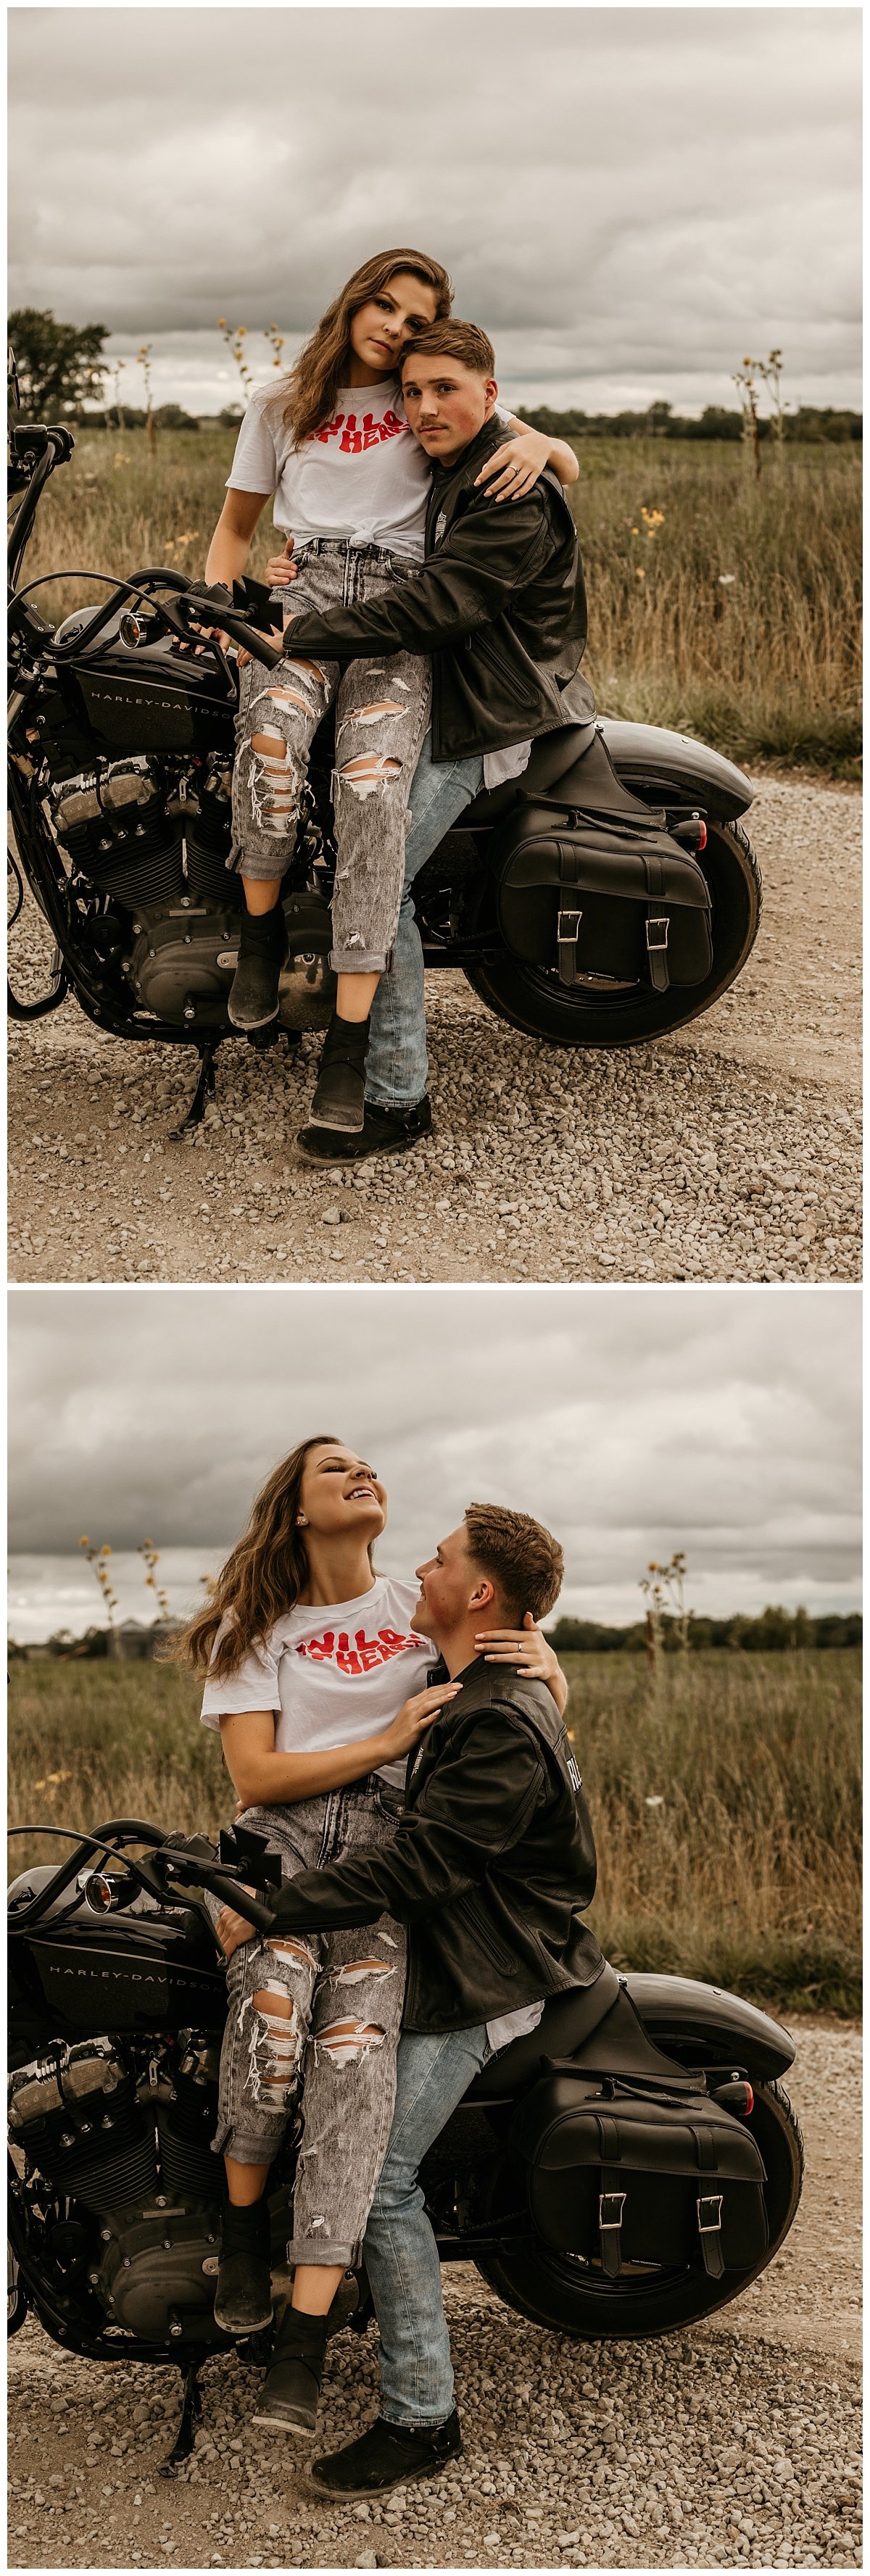 motorcycle+session+_+adventure+session+_+engagement+session+_+motorcycle+photos+_+lana+del+rey+_+ride+or+die+_+adventurous+couple+_+kansas+city+photographer+_+kansas+city+photography (10).jpeg